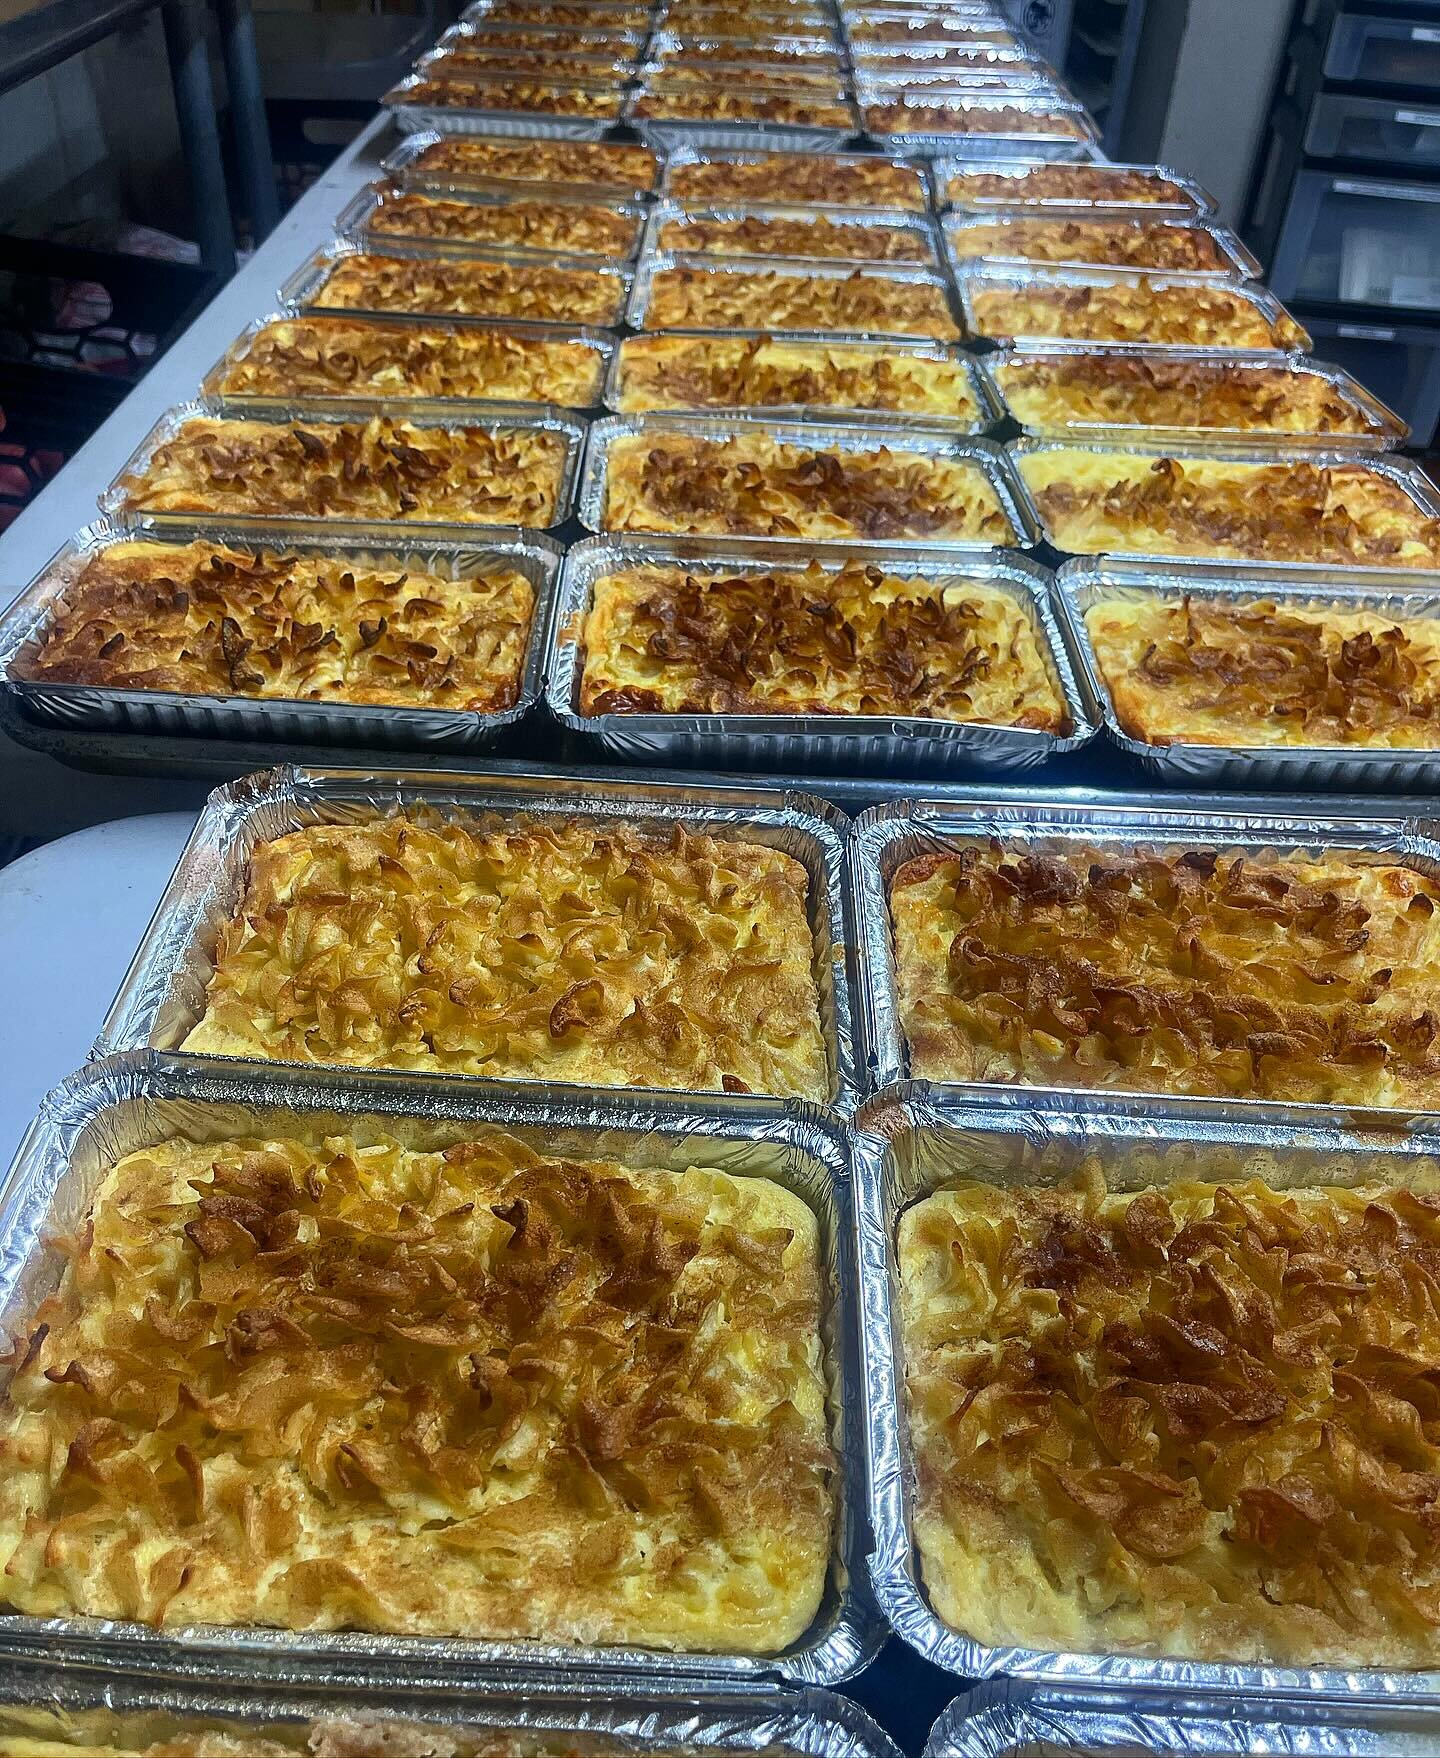 Hanukkah or Chanukah. Kugel or kugel. Tomato tomato. We just want you to enjoy. Take a break from latkes and come try one of our homemade kugels. #HappyHanukkah #NoOtherDeli